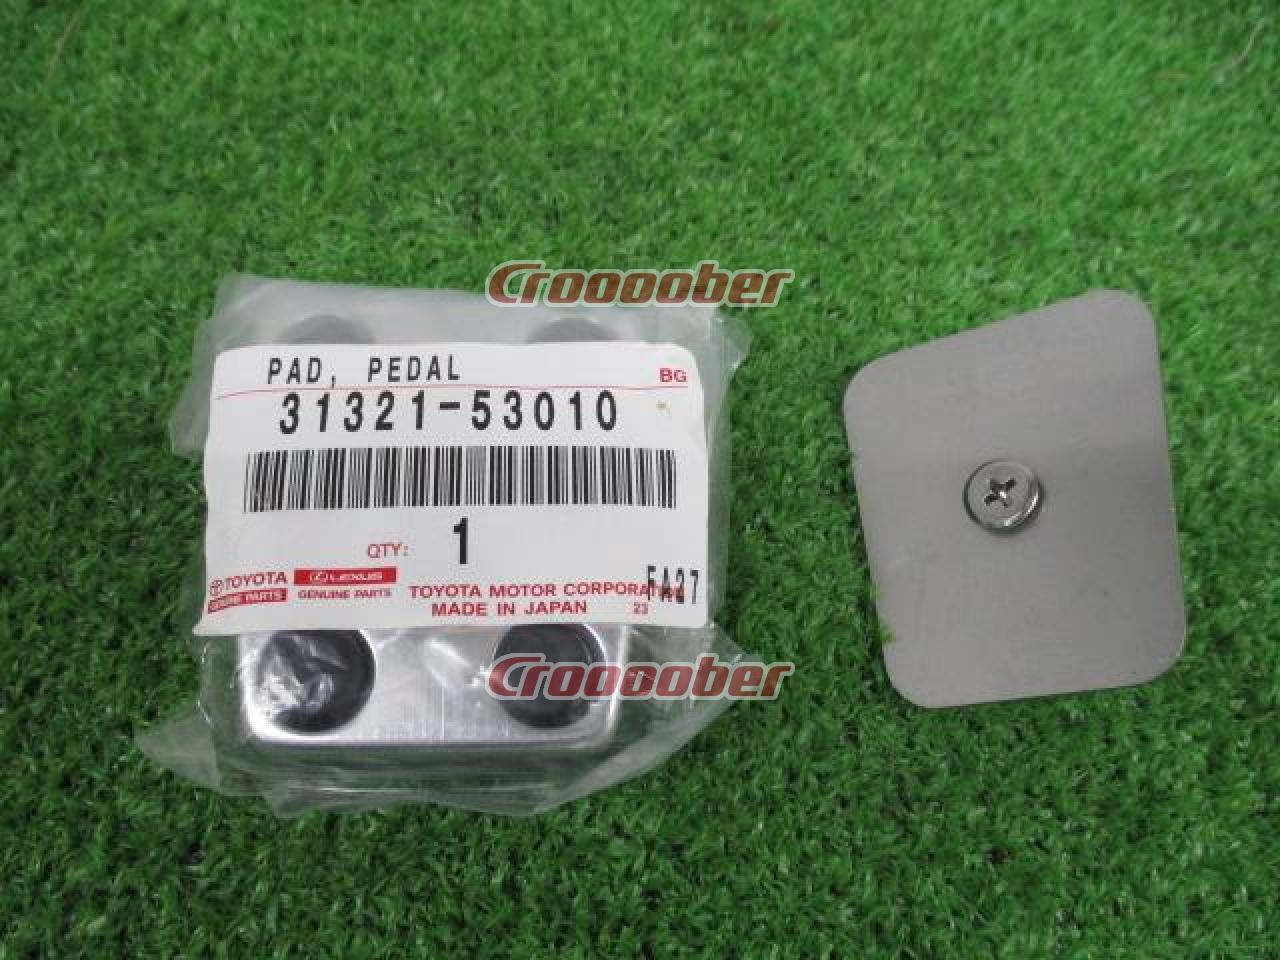 Toyota Camry Corolla Echo FjCruiser Clutch Pedal Pad Genuine Parts 31321-52010-1 